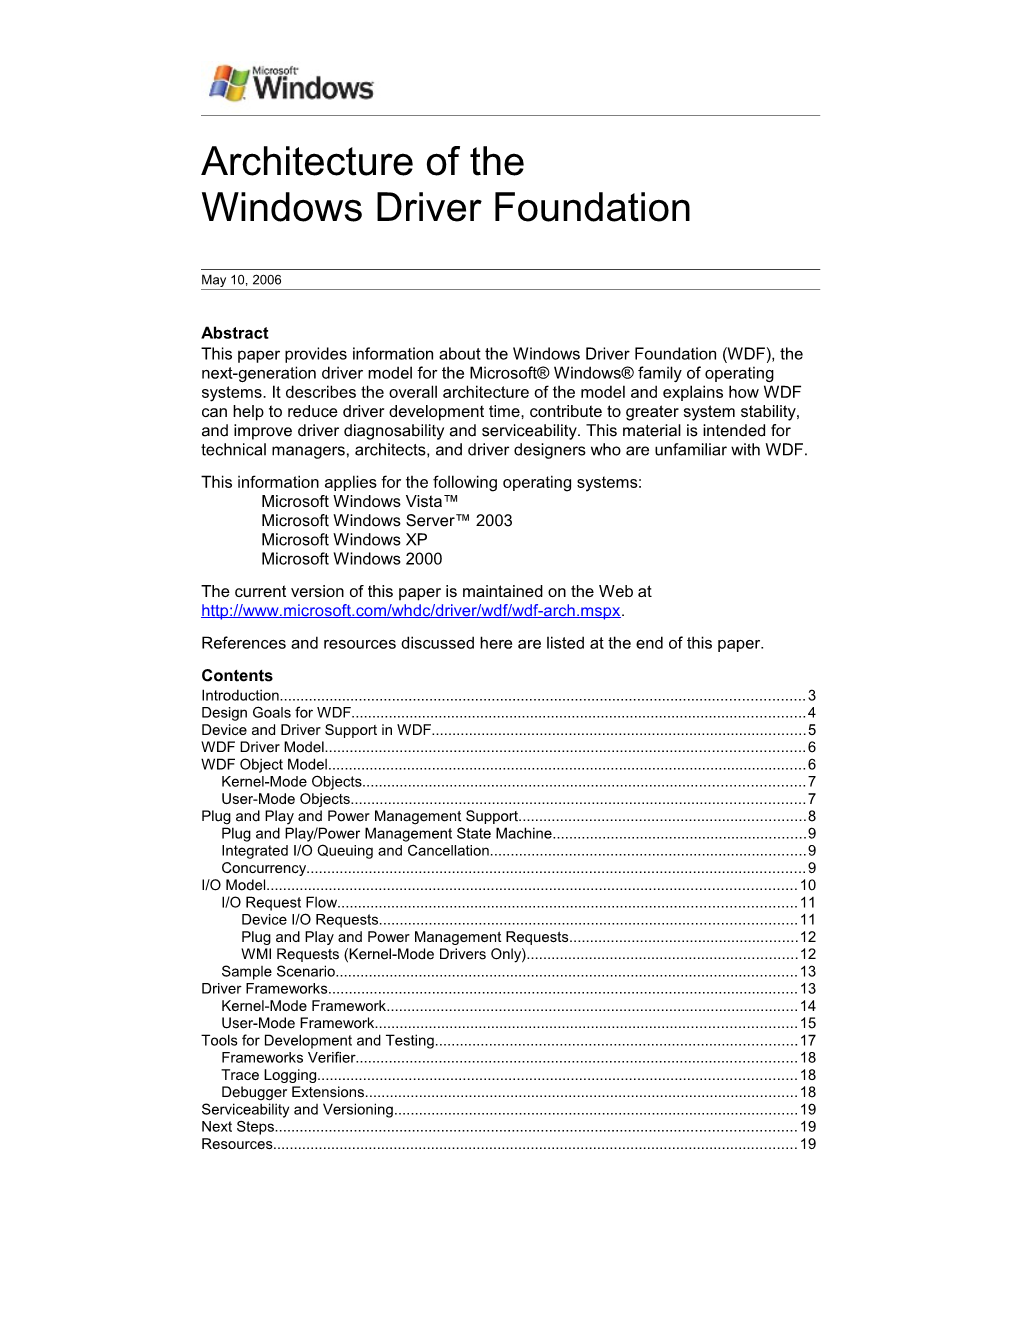 Architecture of the Windows Driver Foundation